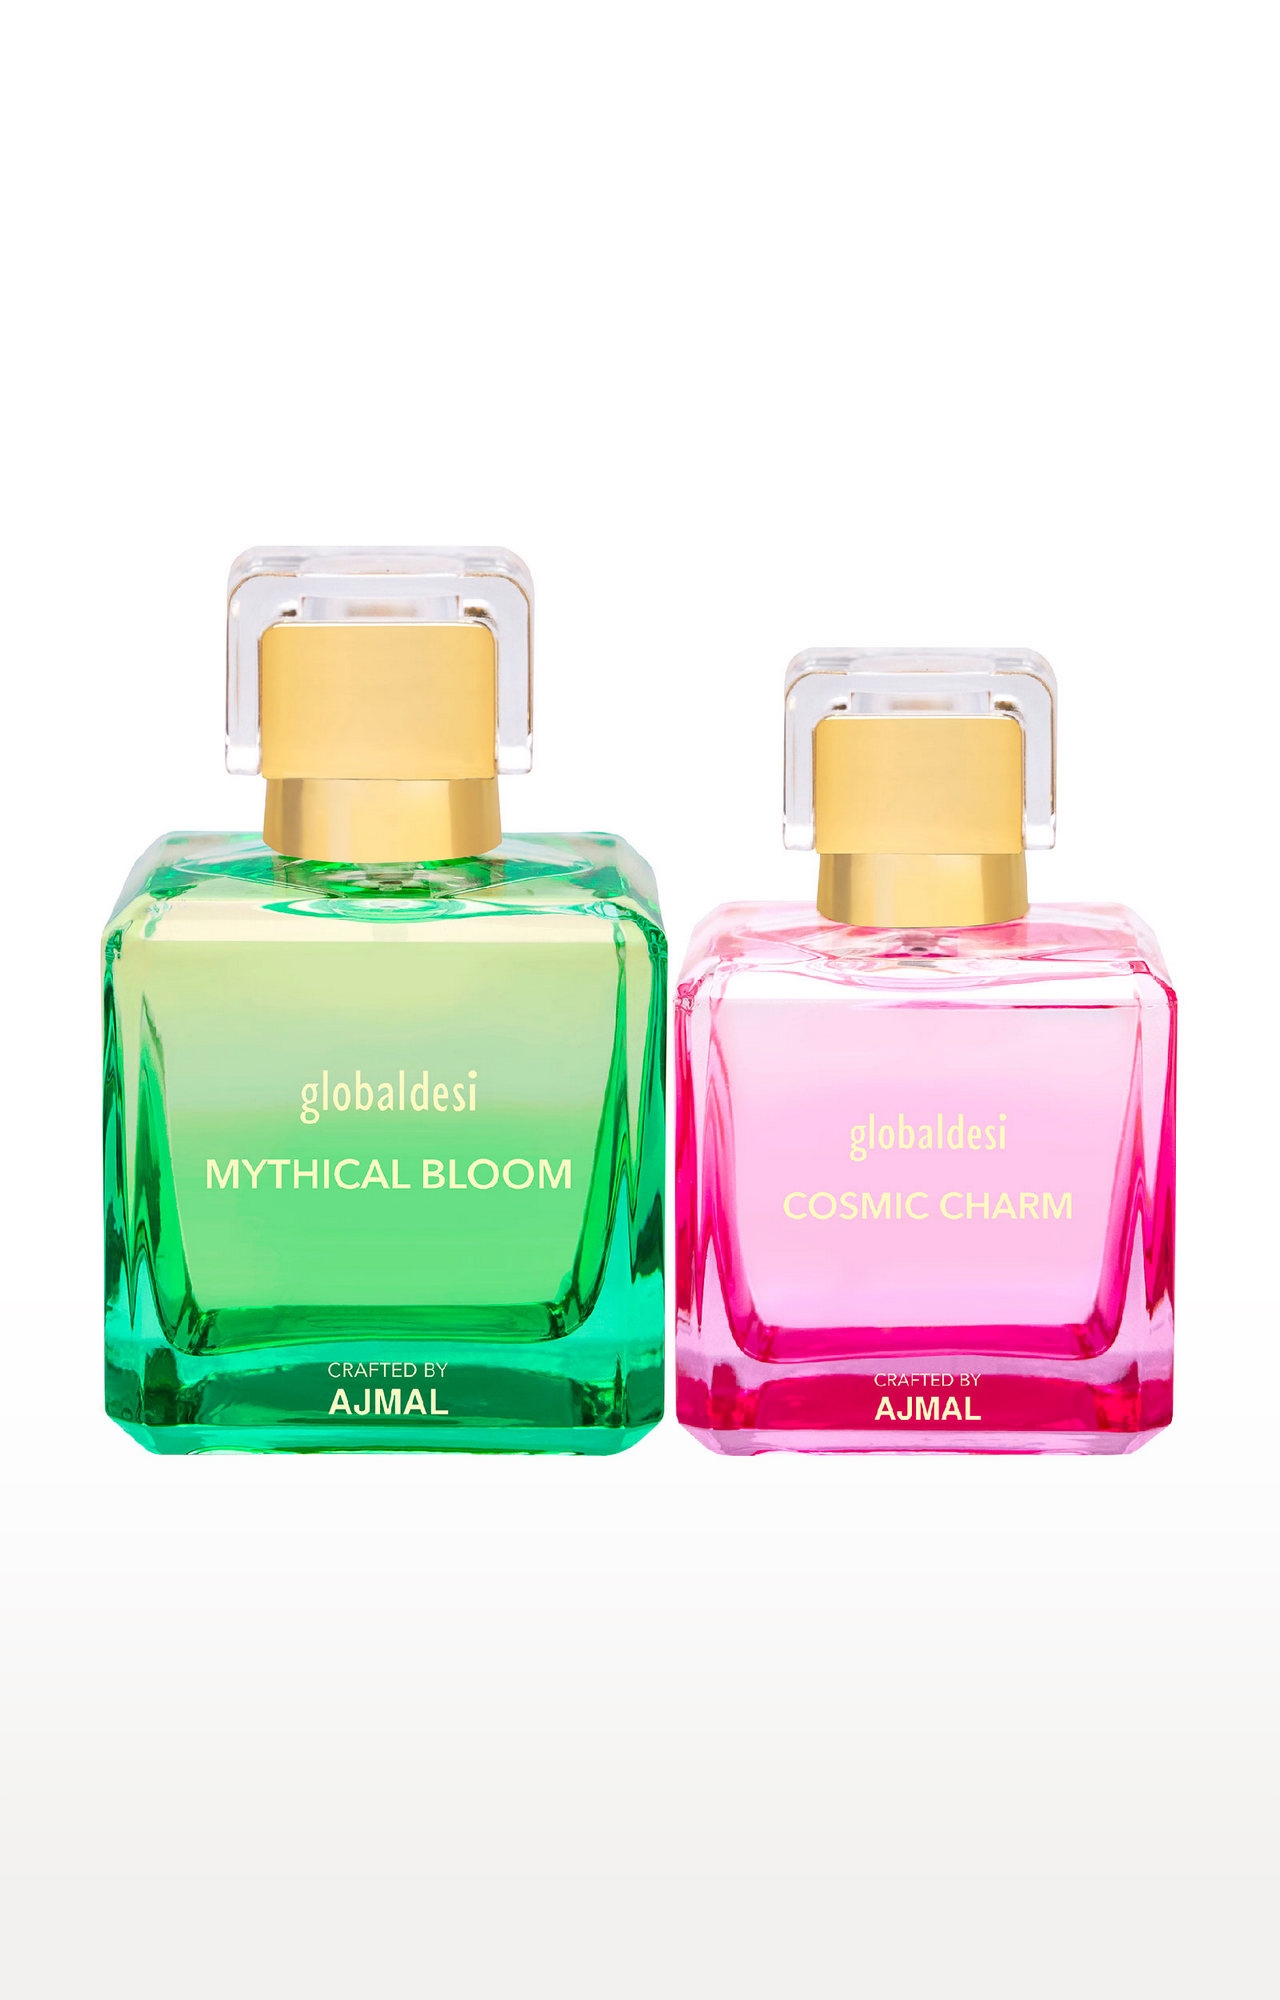 Global Desi Crafted By Ajmal | Global Mythical Bloom 100ML & Cosmic Charm 50ML Eau De Parfum for Women Crafted by Ajmal + 2 Parfum Testers